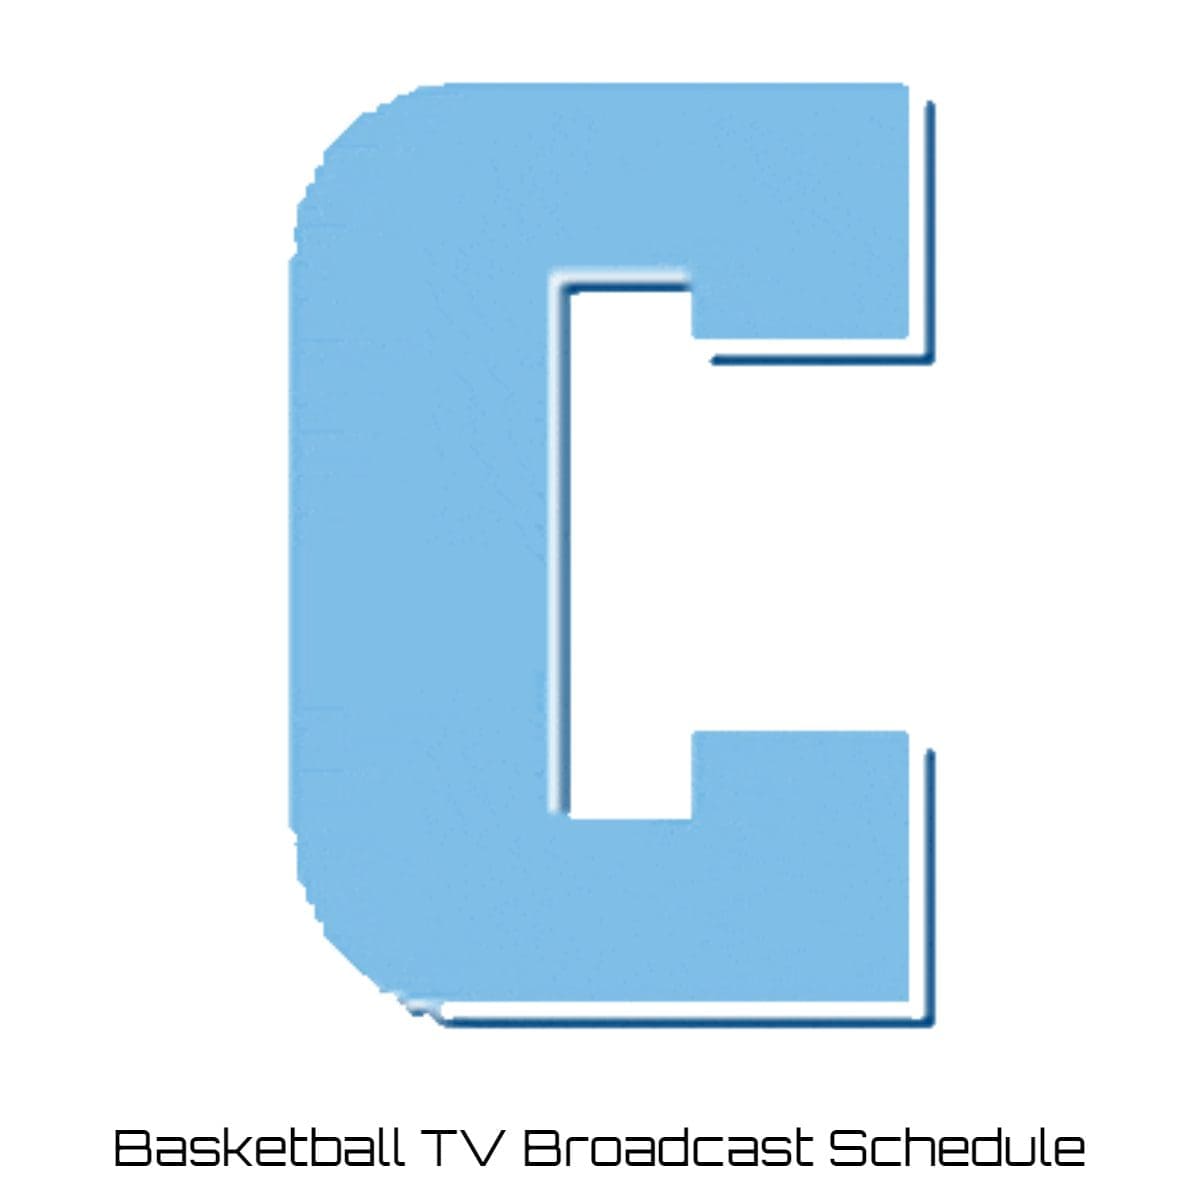 Columbia Lions Basketball TV Broadcast Schedule